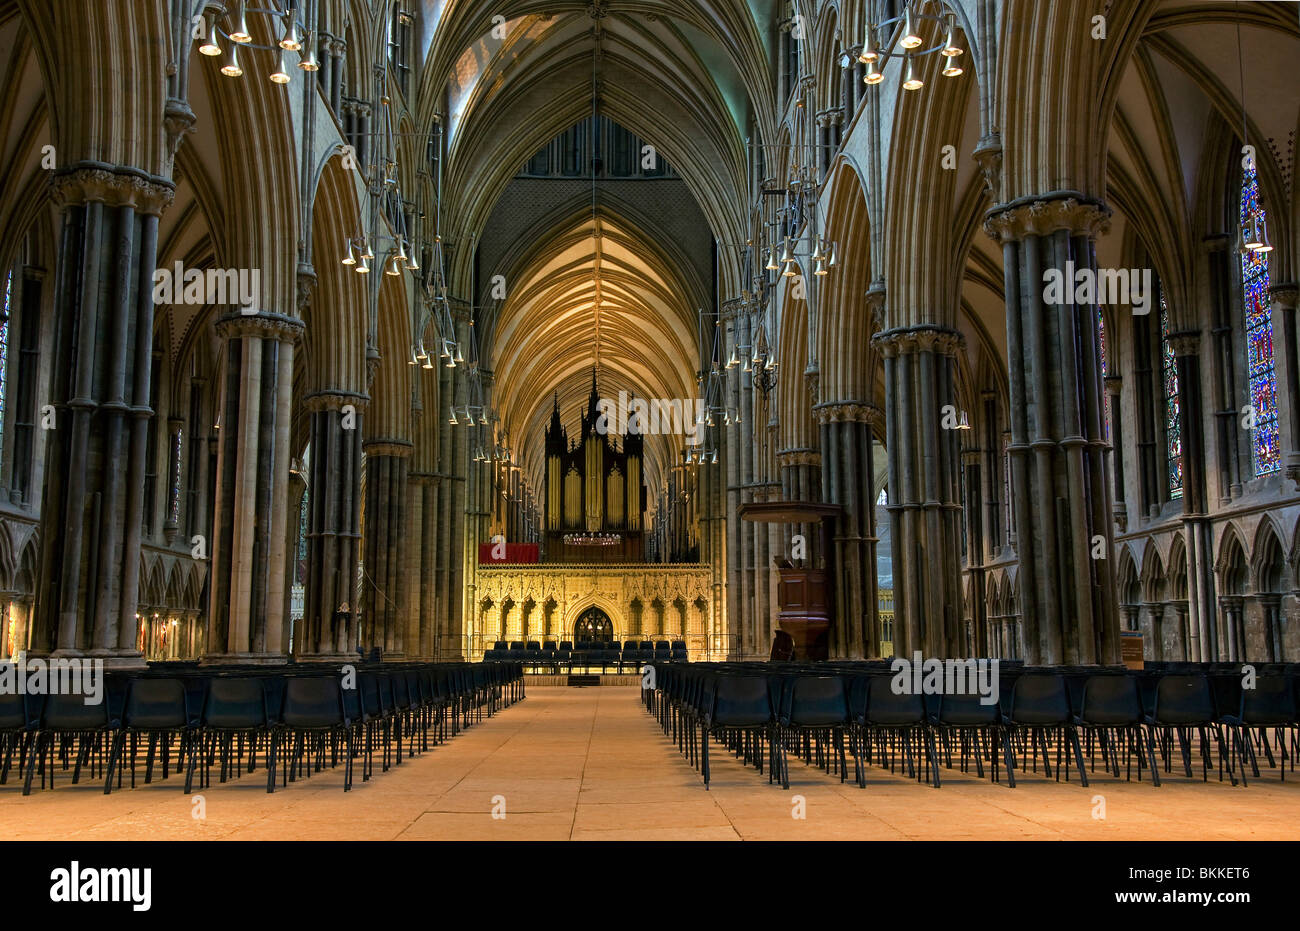 Lincoln Cathedral Interior. Stock Photo